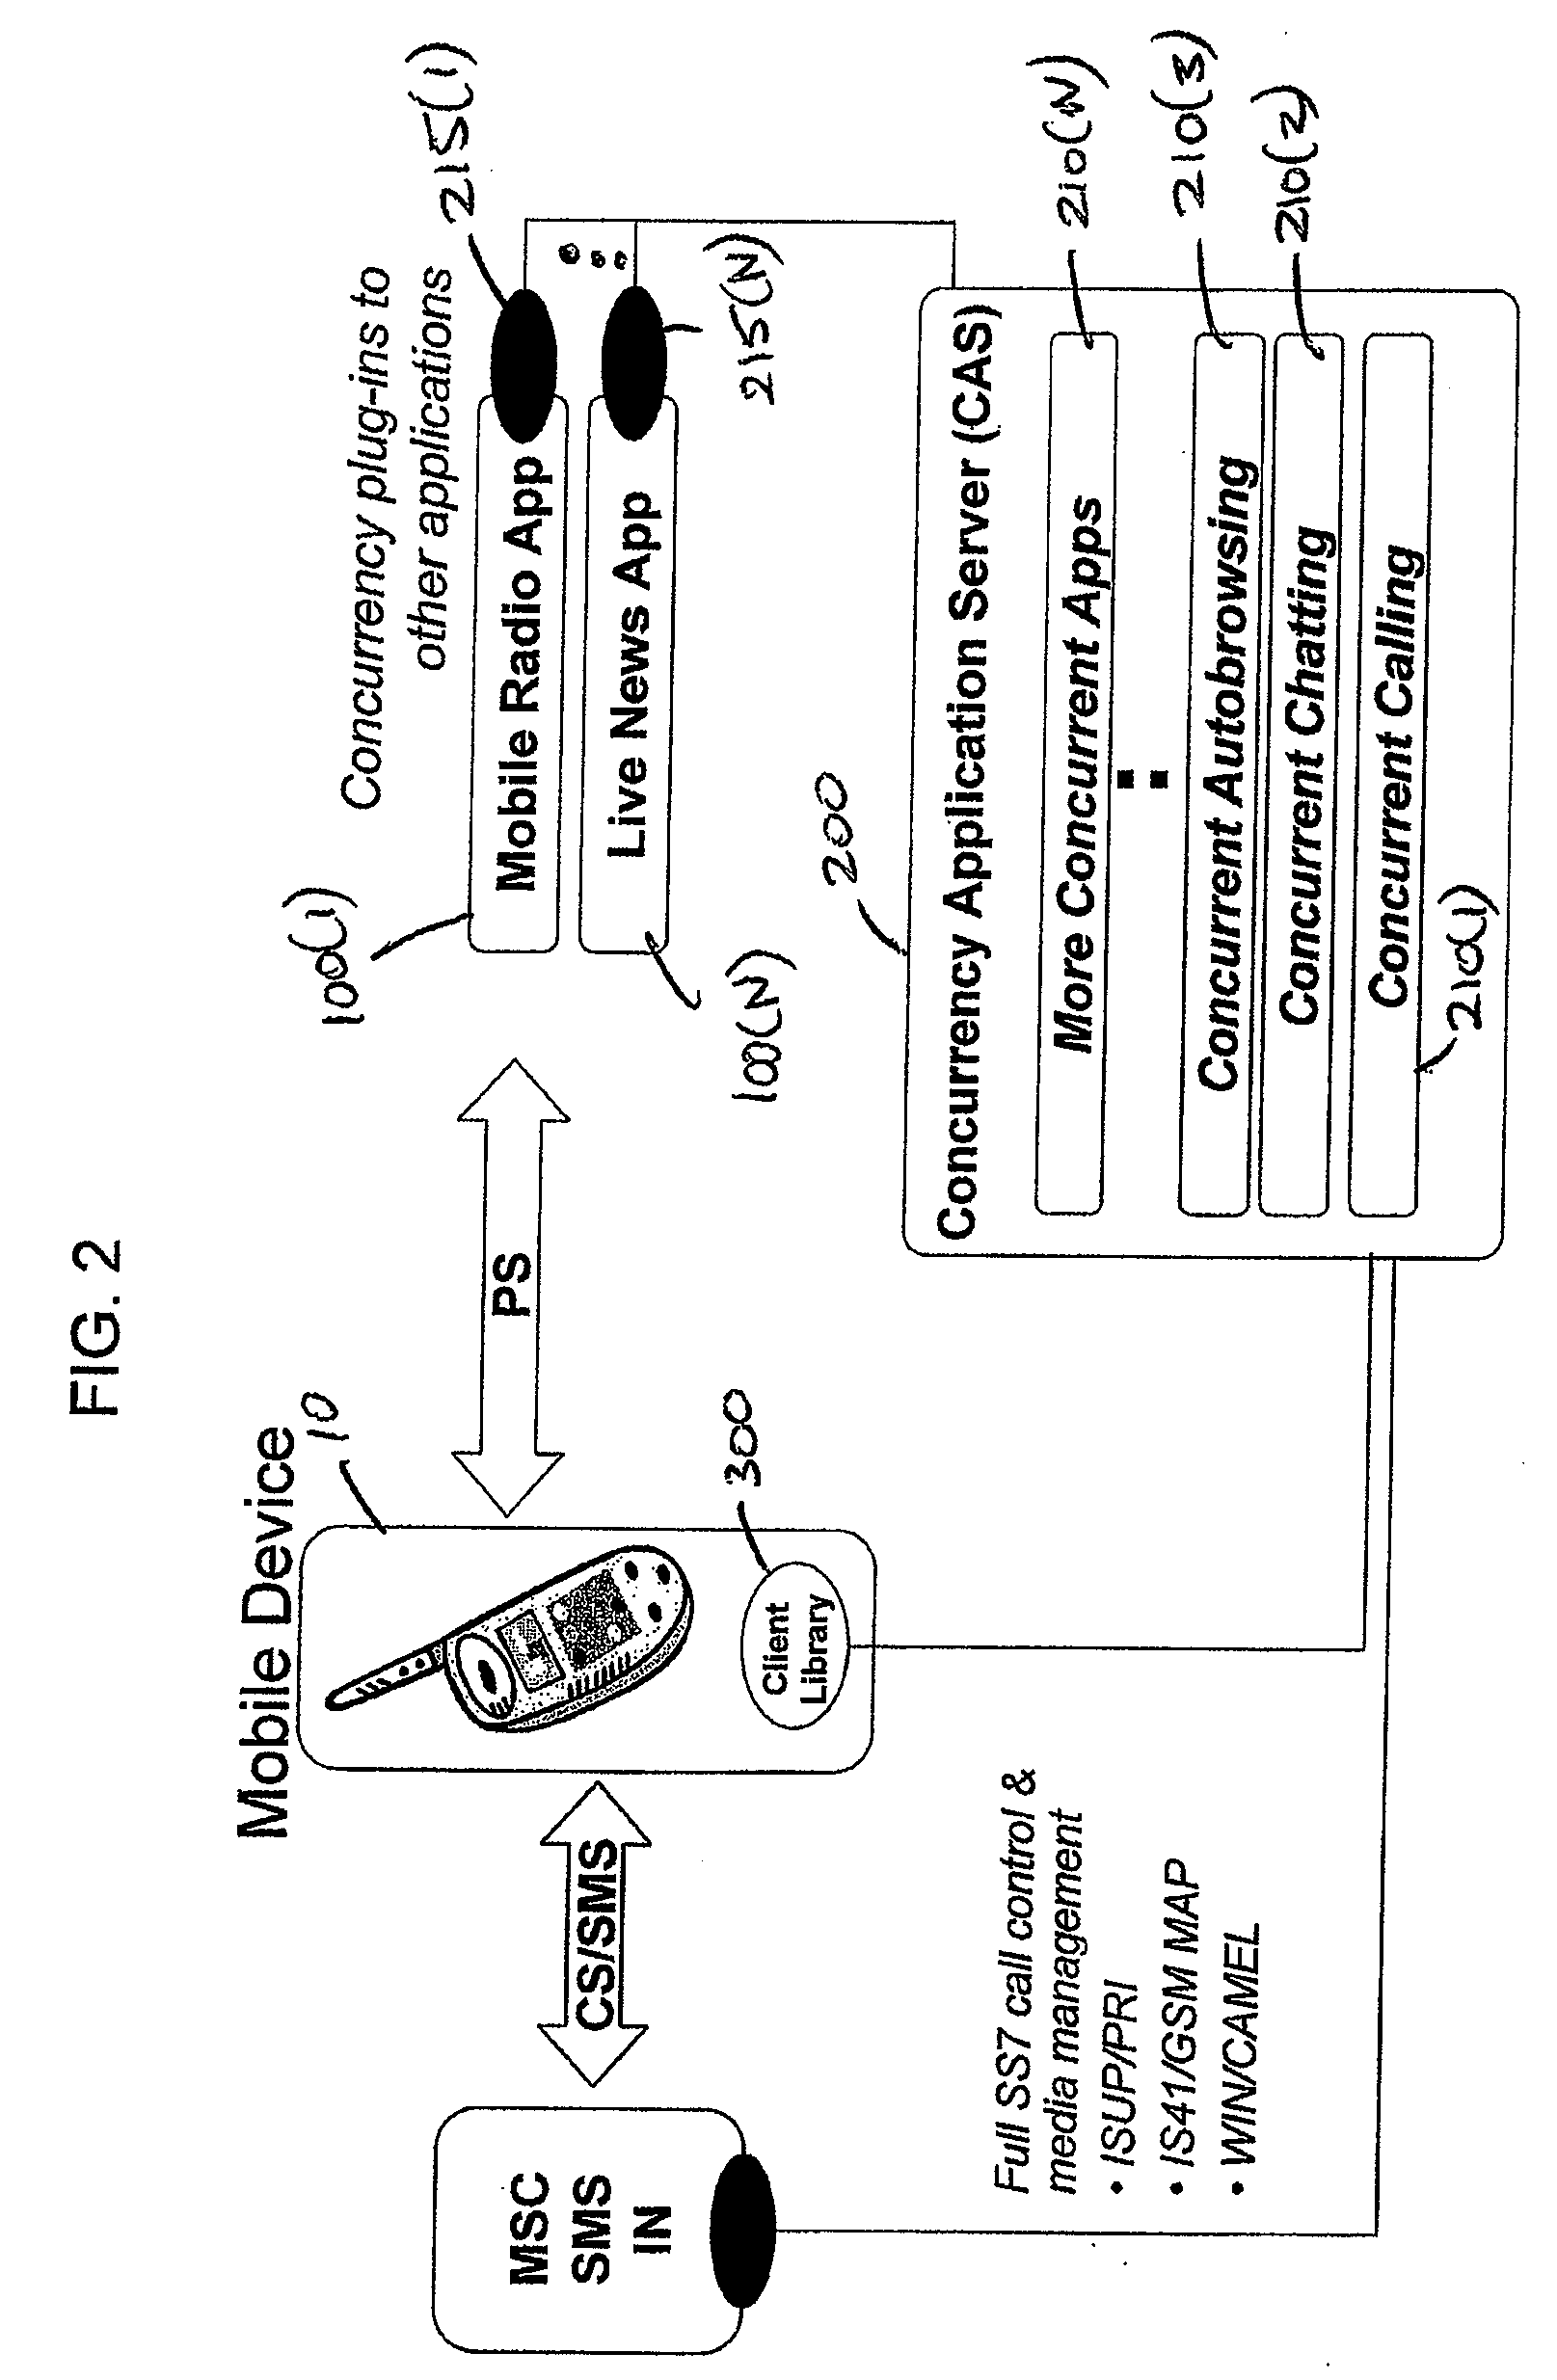 System and Method for Sending Mobile Media Content to Another Mobile Device User